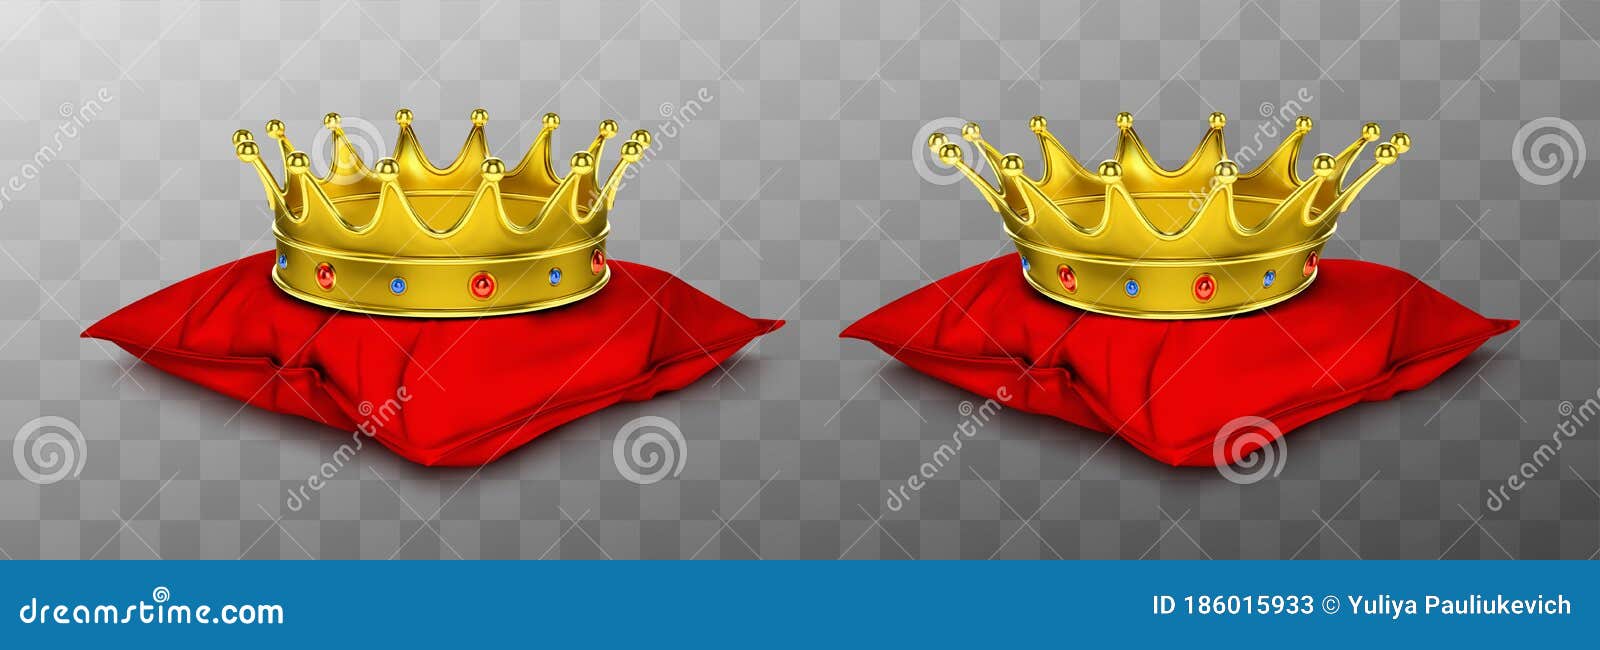 Gold Royal Crown For King And Queen On Red Pillow Stock ...